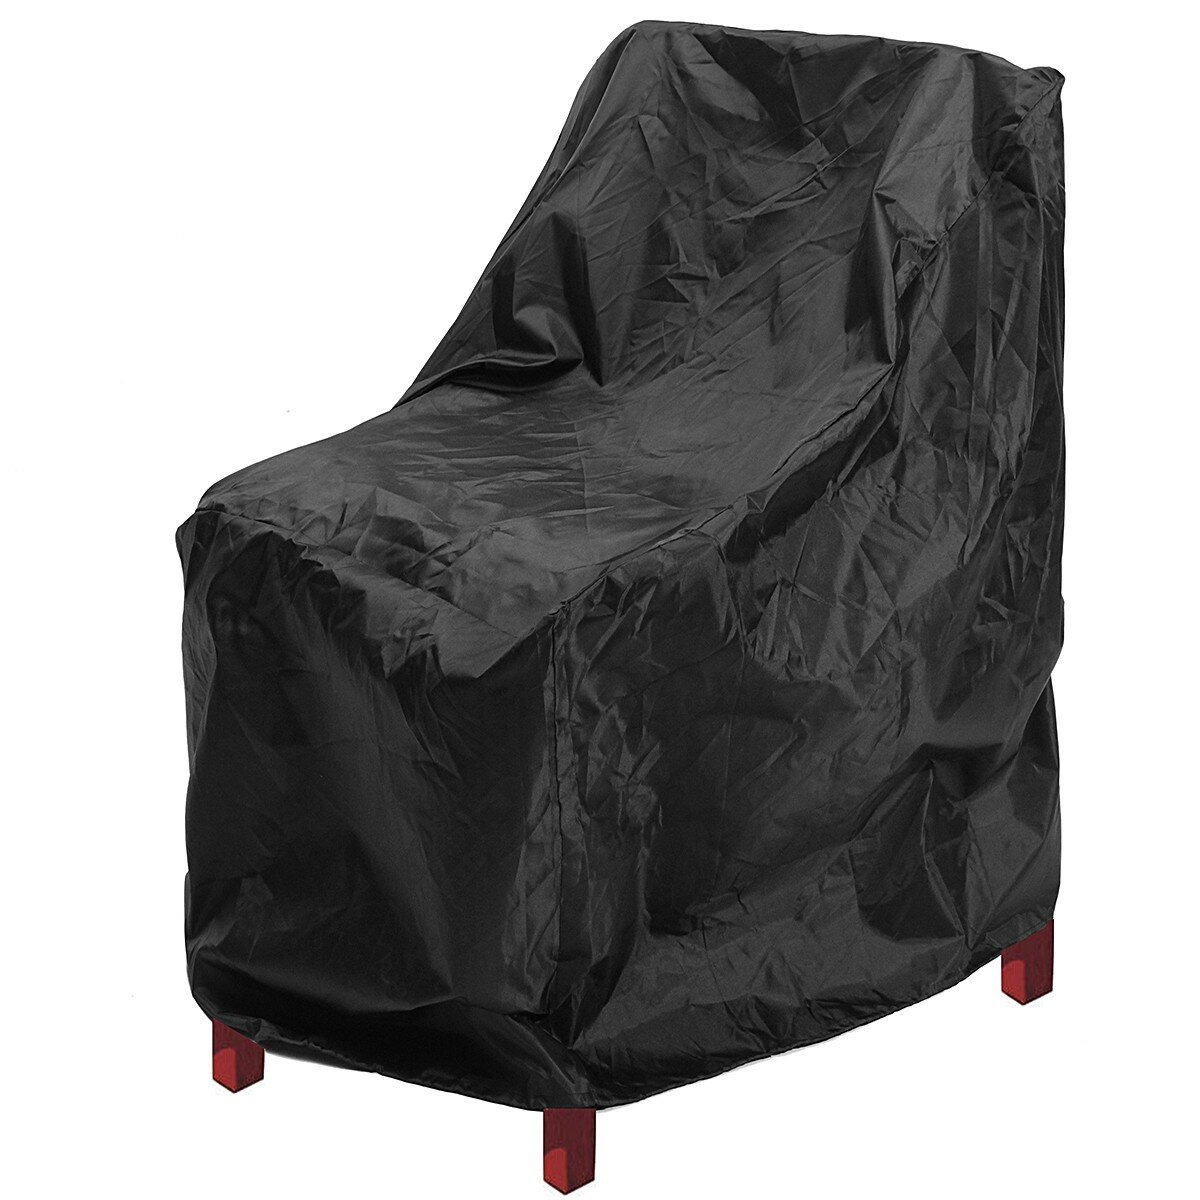 KING DO WAY 420D Oxford Cloth Chair Cover Anti-UV Dustproof Chair Cover